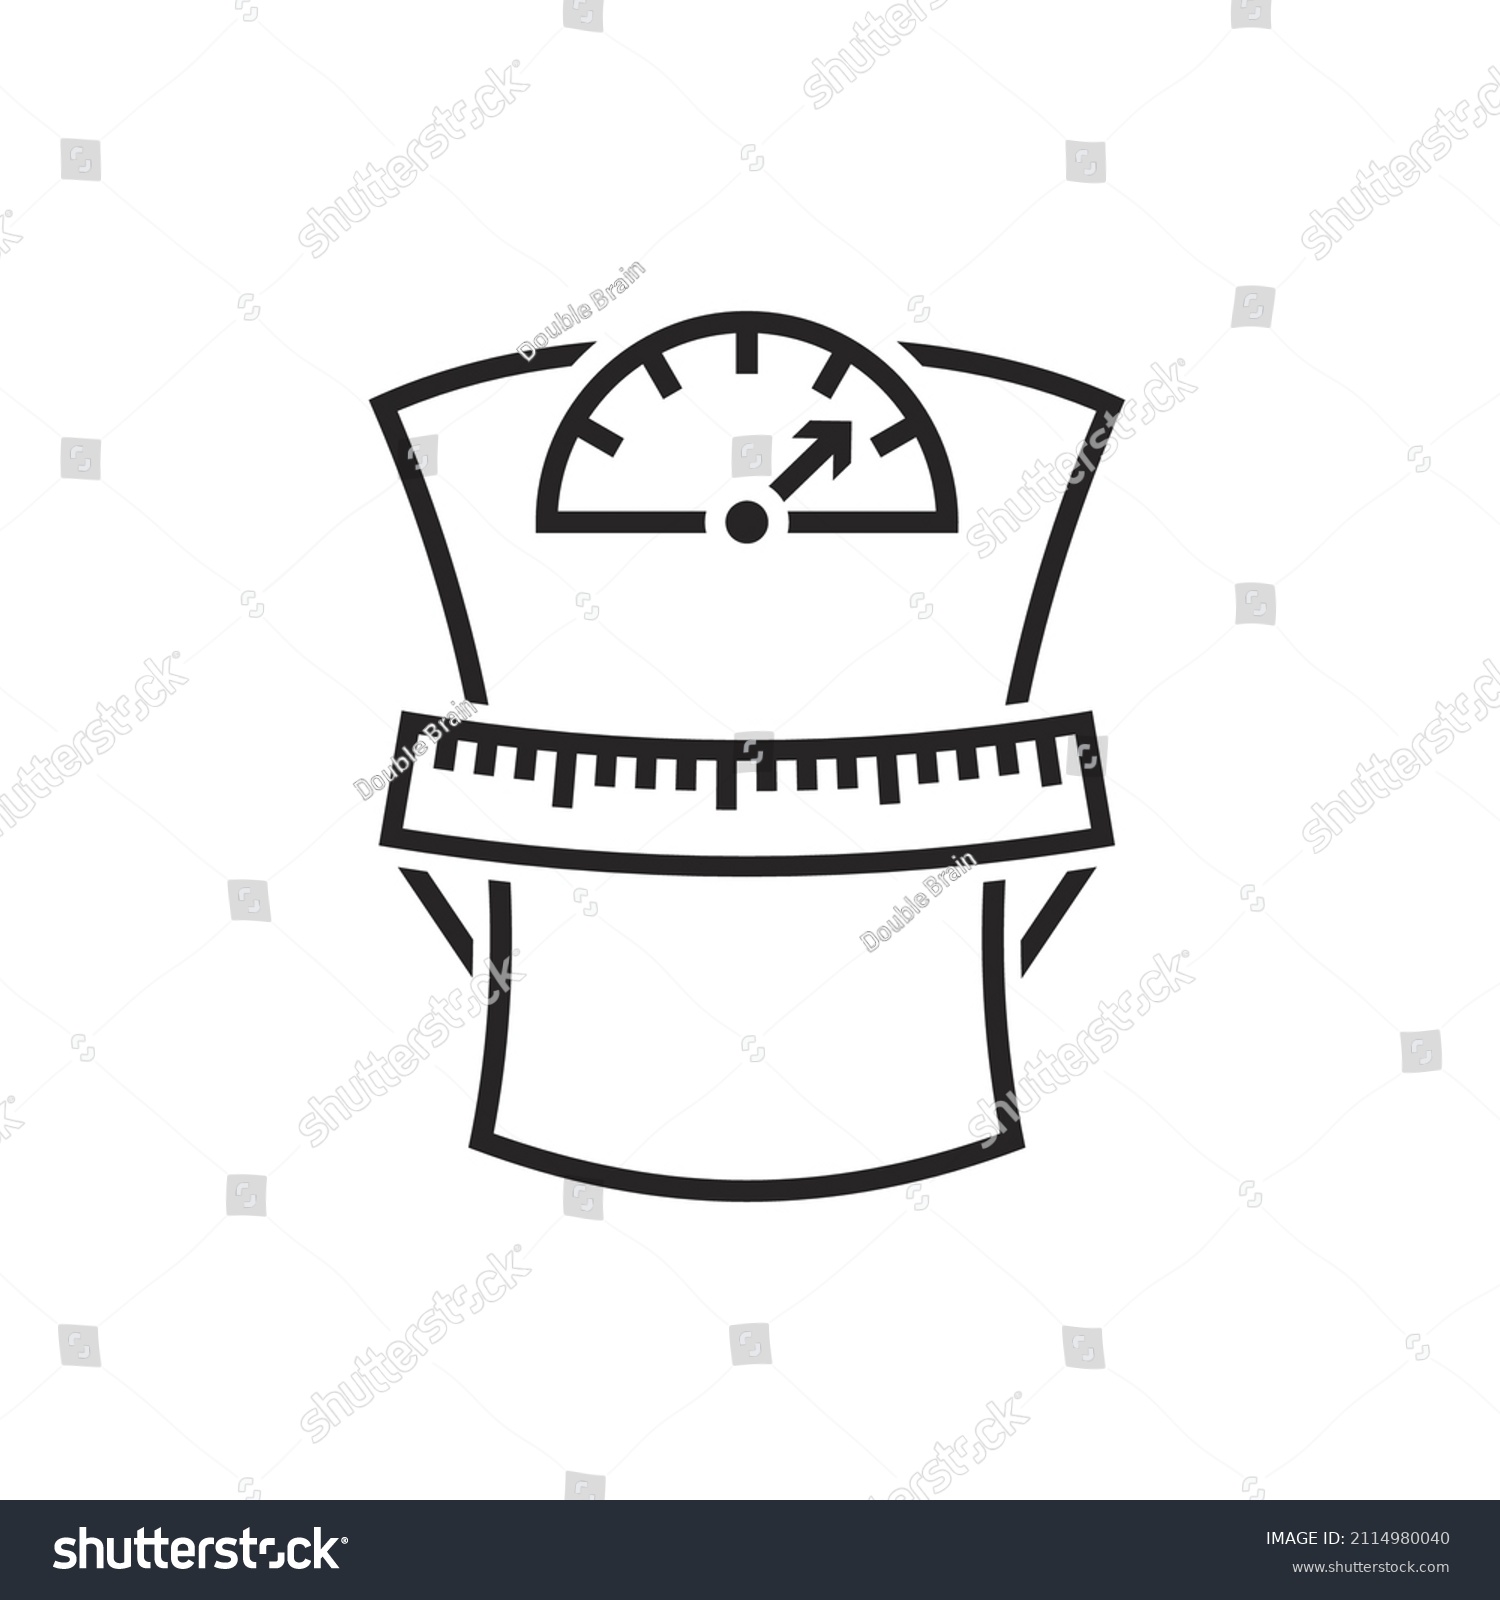 SVG of Weight loss icon, measuring tape wrapped around scales shaped of waist. Slimming, fitness, diet, healthy lifestyle. Vector illustration for sport wellness app, weight control application advertising. svg